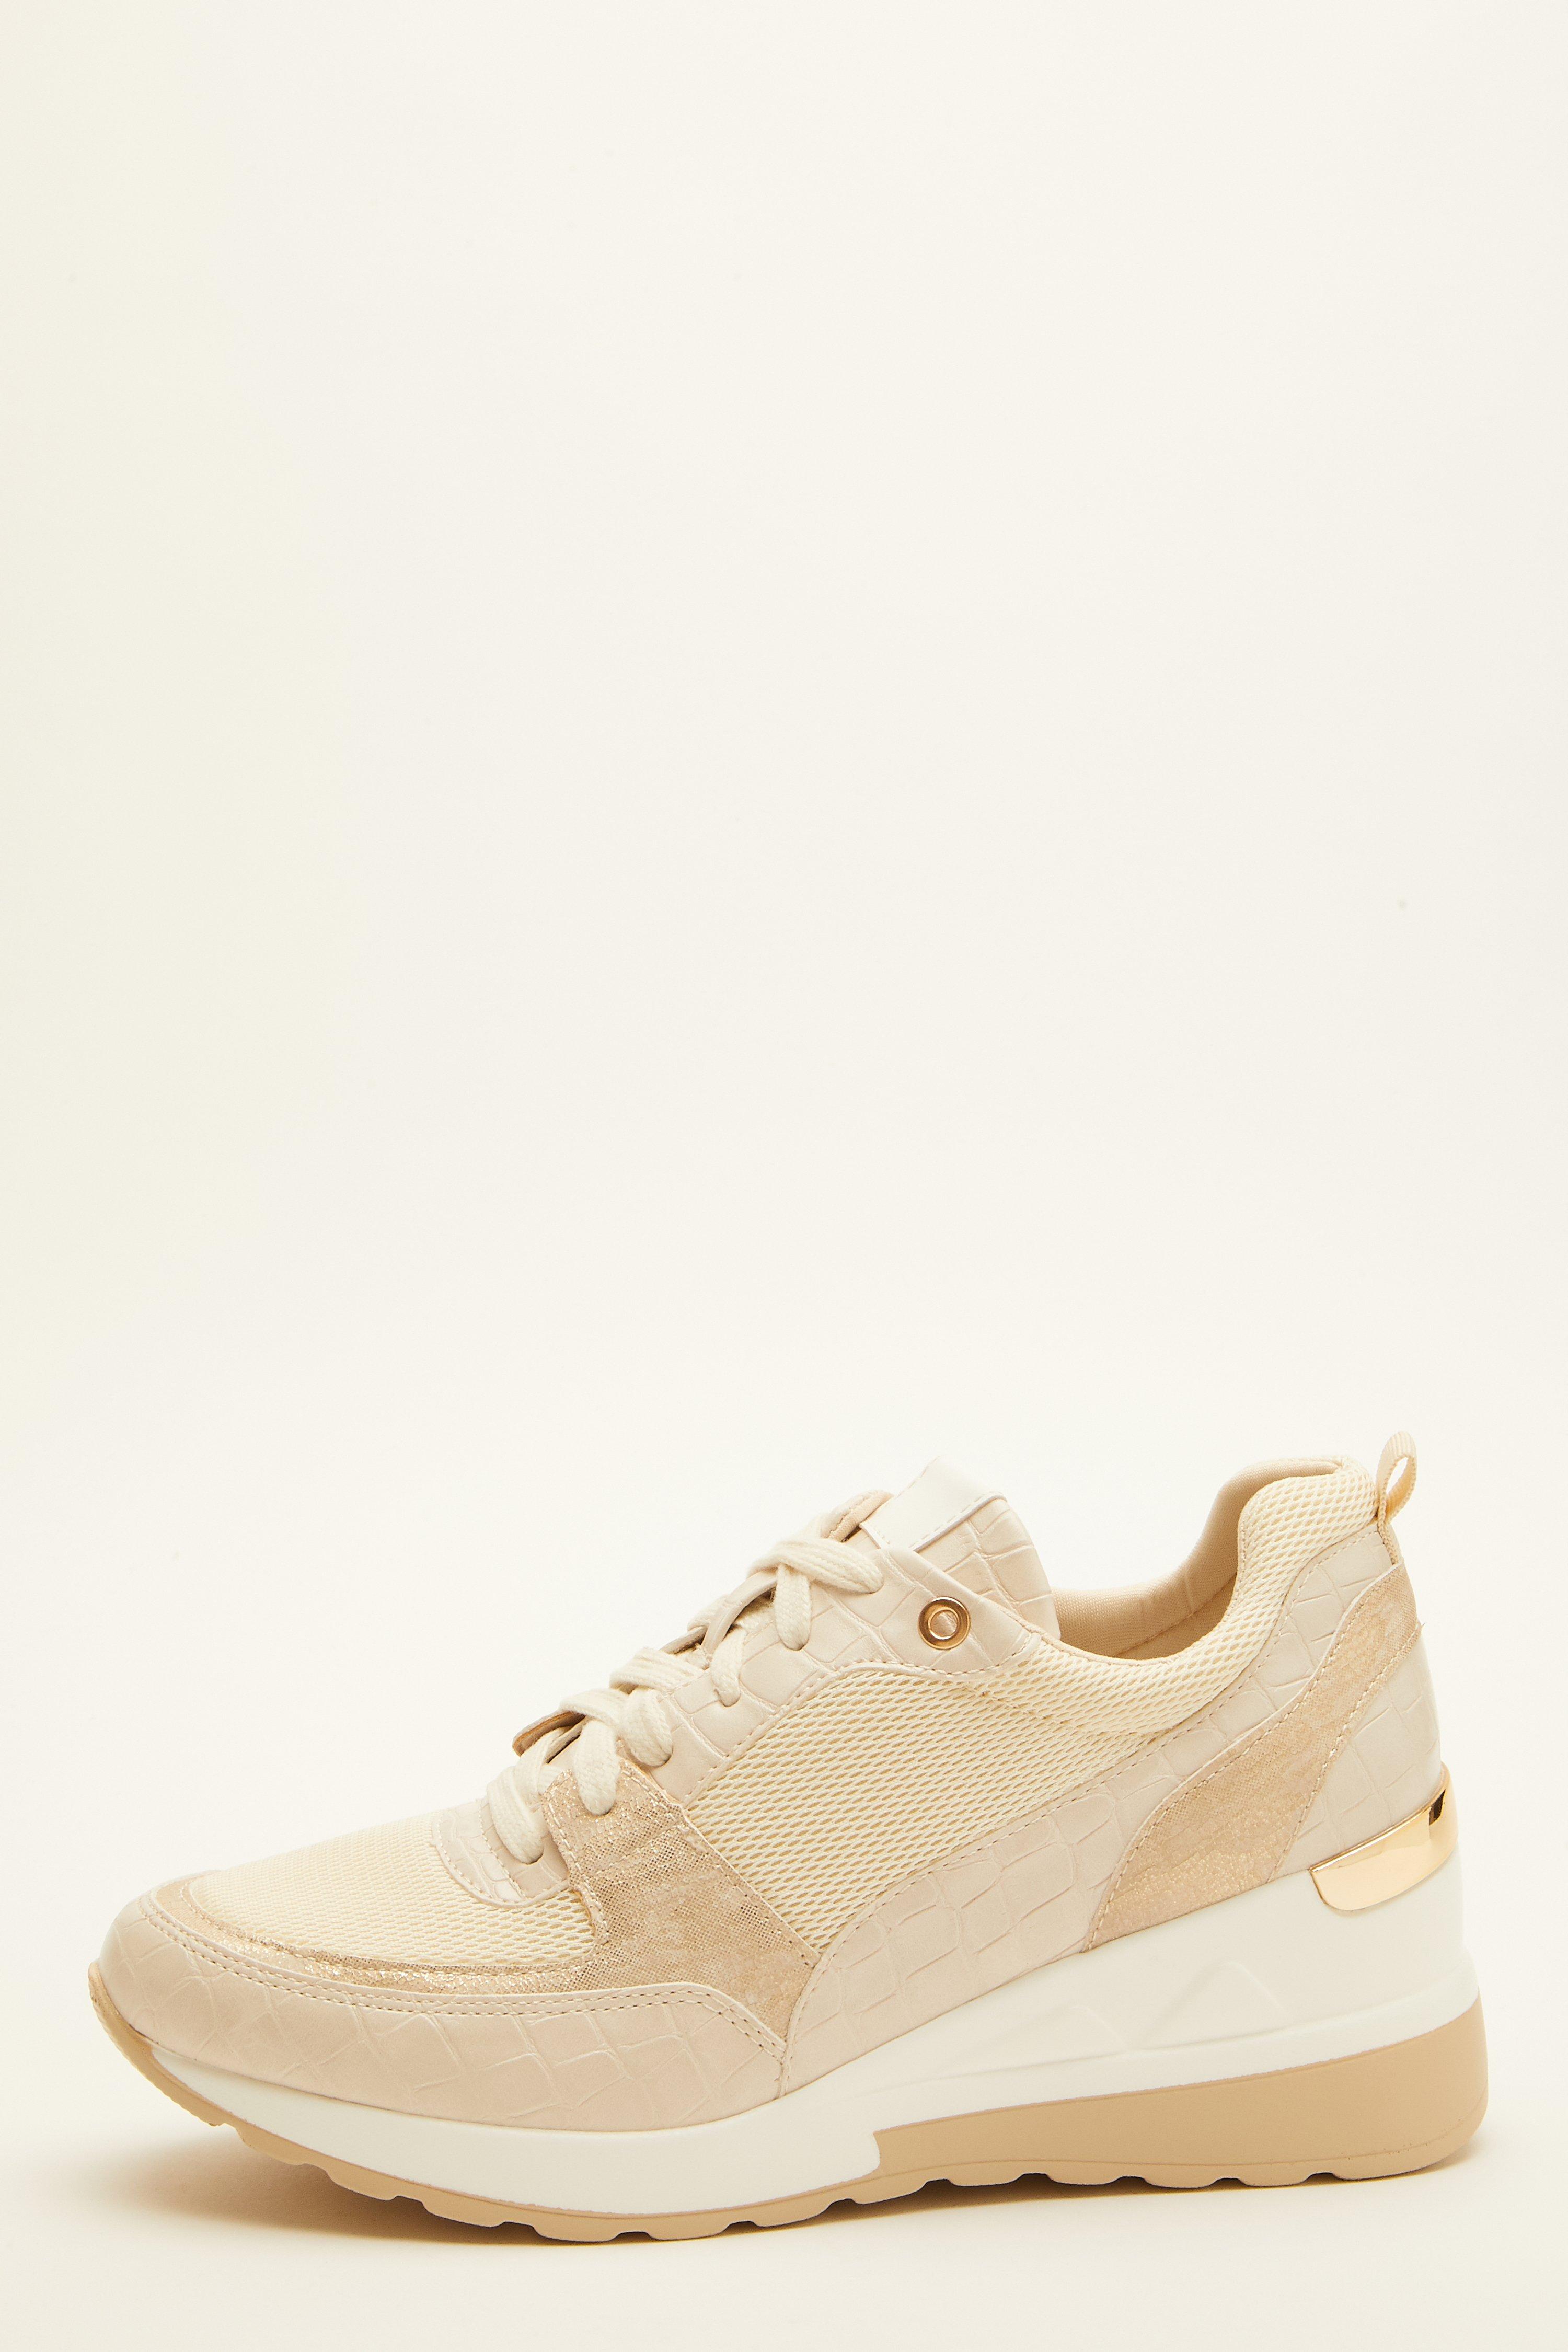 Nude Faux Leather Wedge Trainer - Quiz Clothing